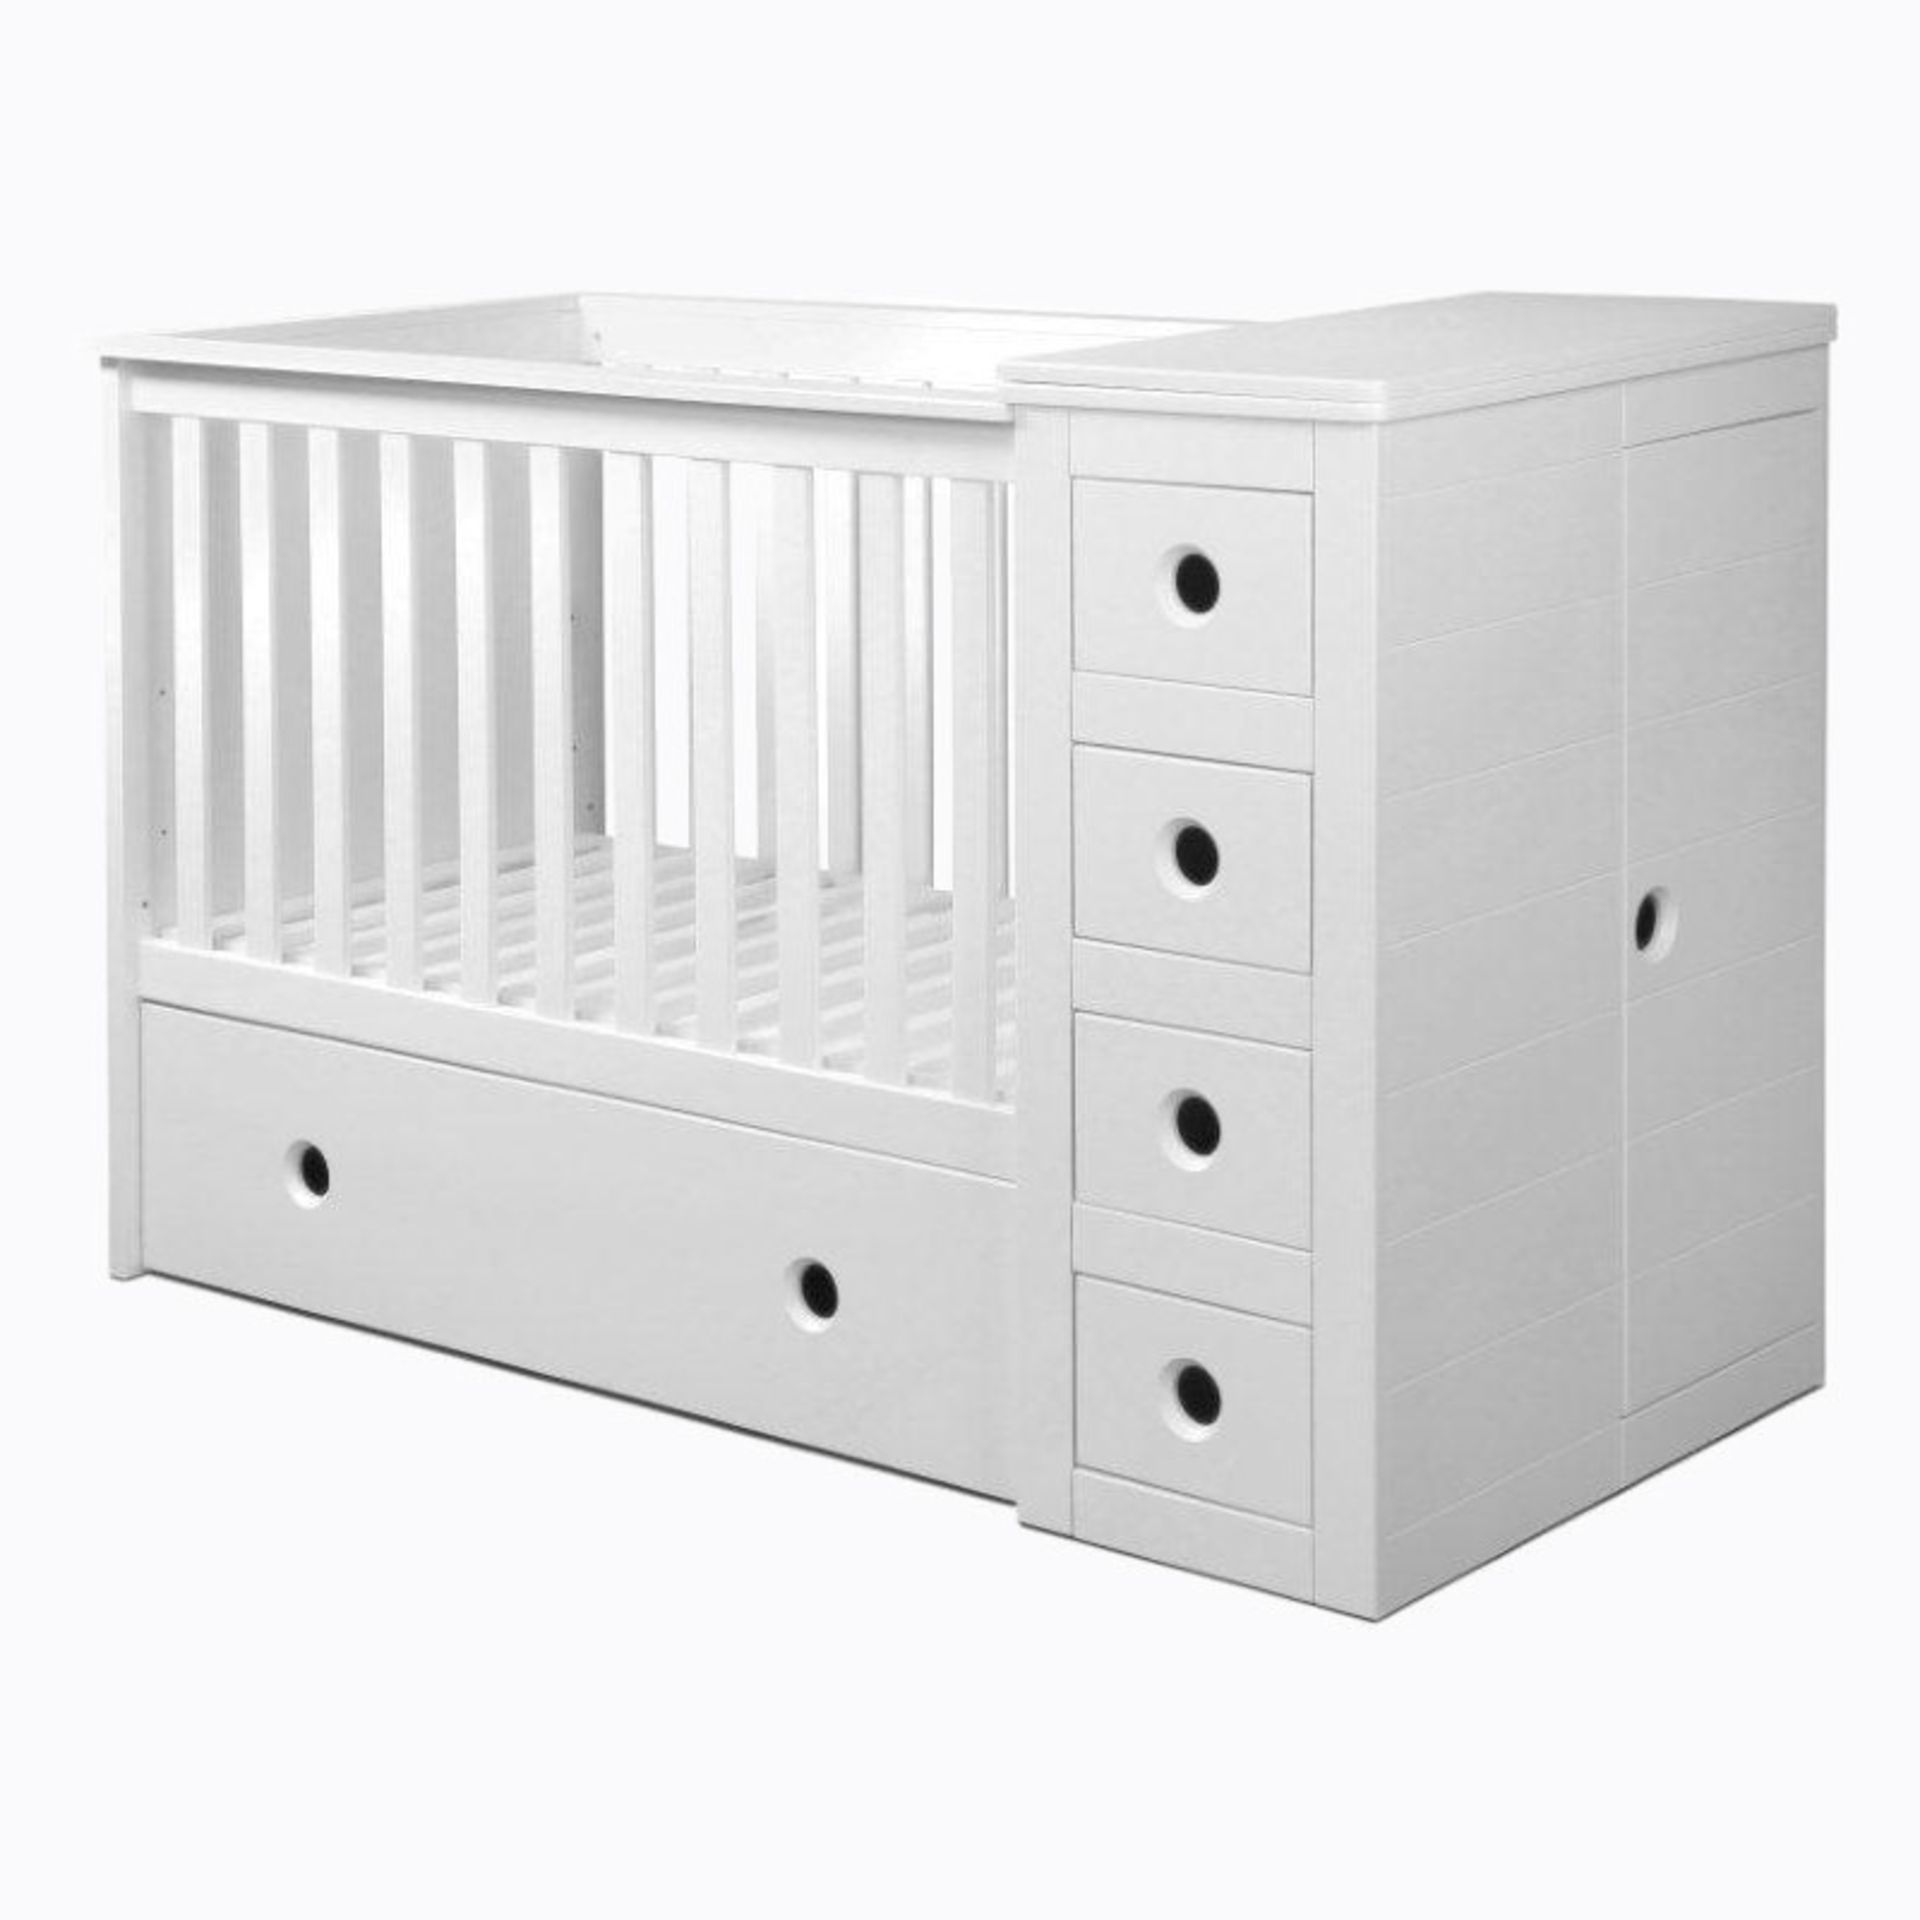 1 KIDDIC 3-IN-1 COT BED & CHEST OF DRAWERS WITH DRESSER & MATTRESS RRP Â£499 (GENERIC IMAGE GUIDE)